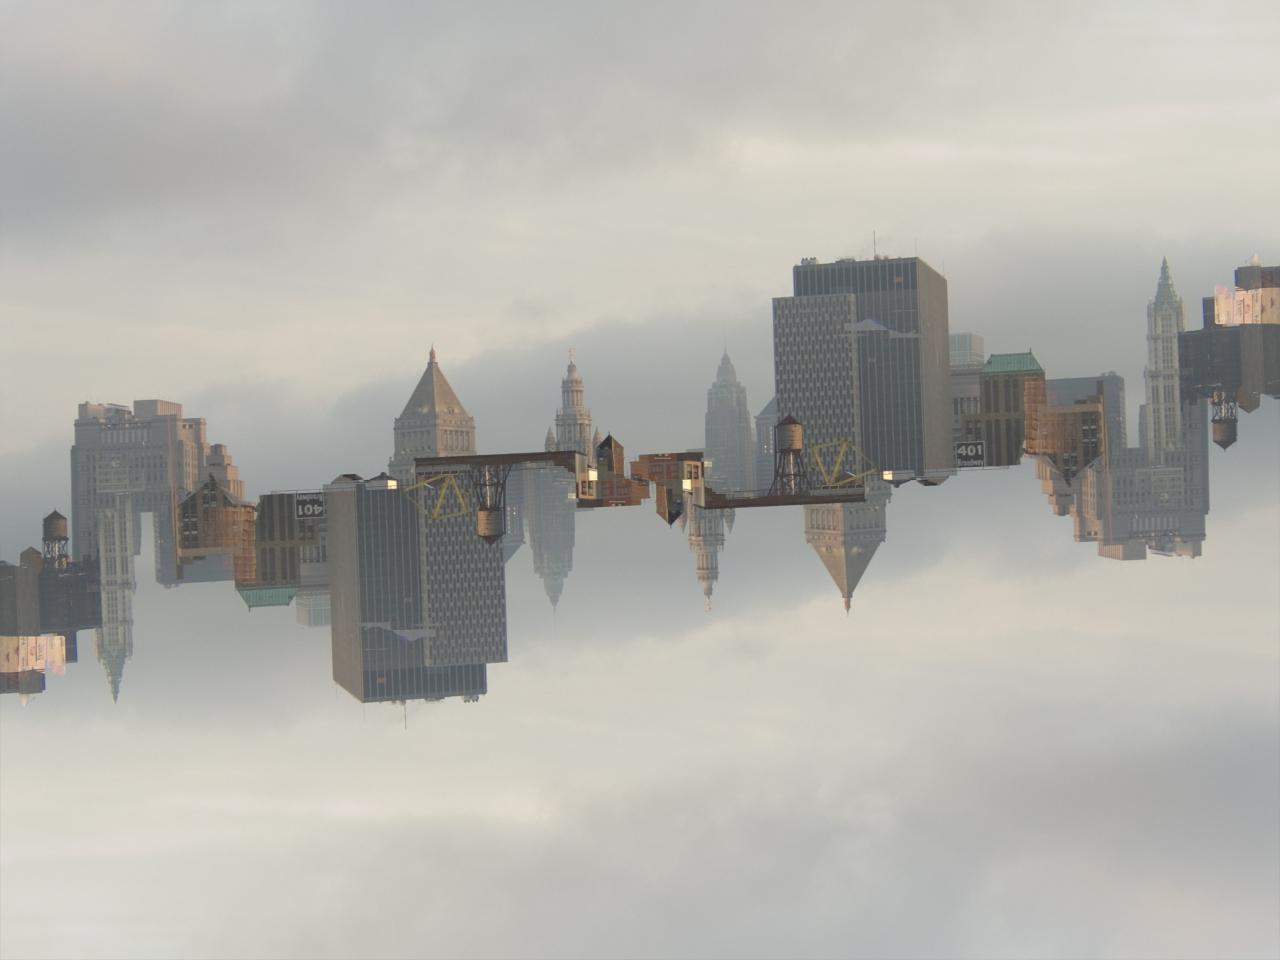 Floating City, 2007, digital photograph photoshopped by Orin Buck.